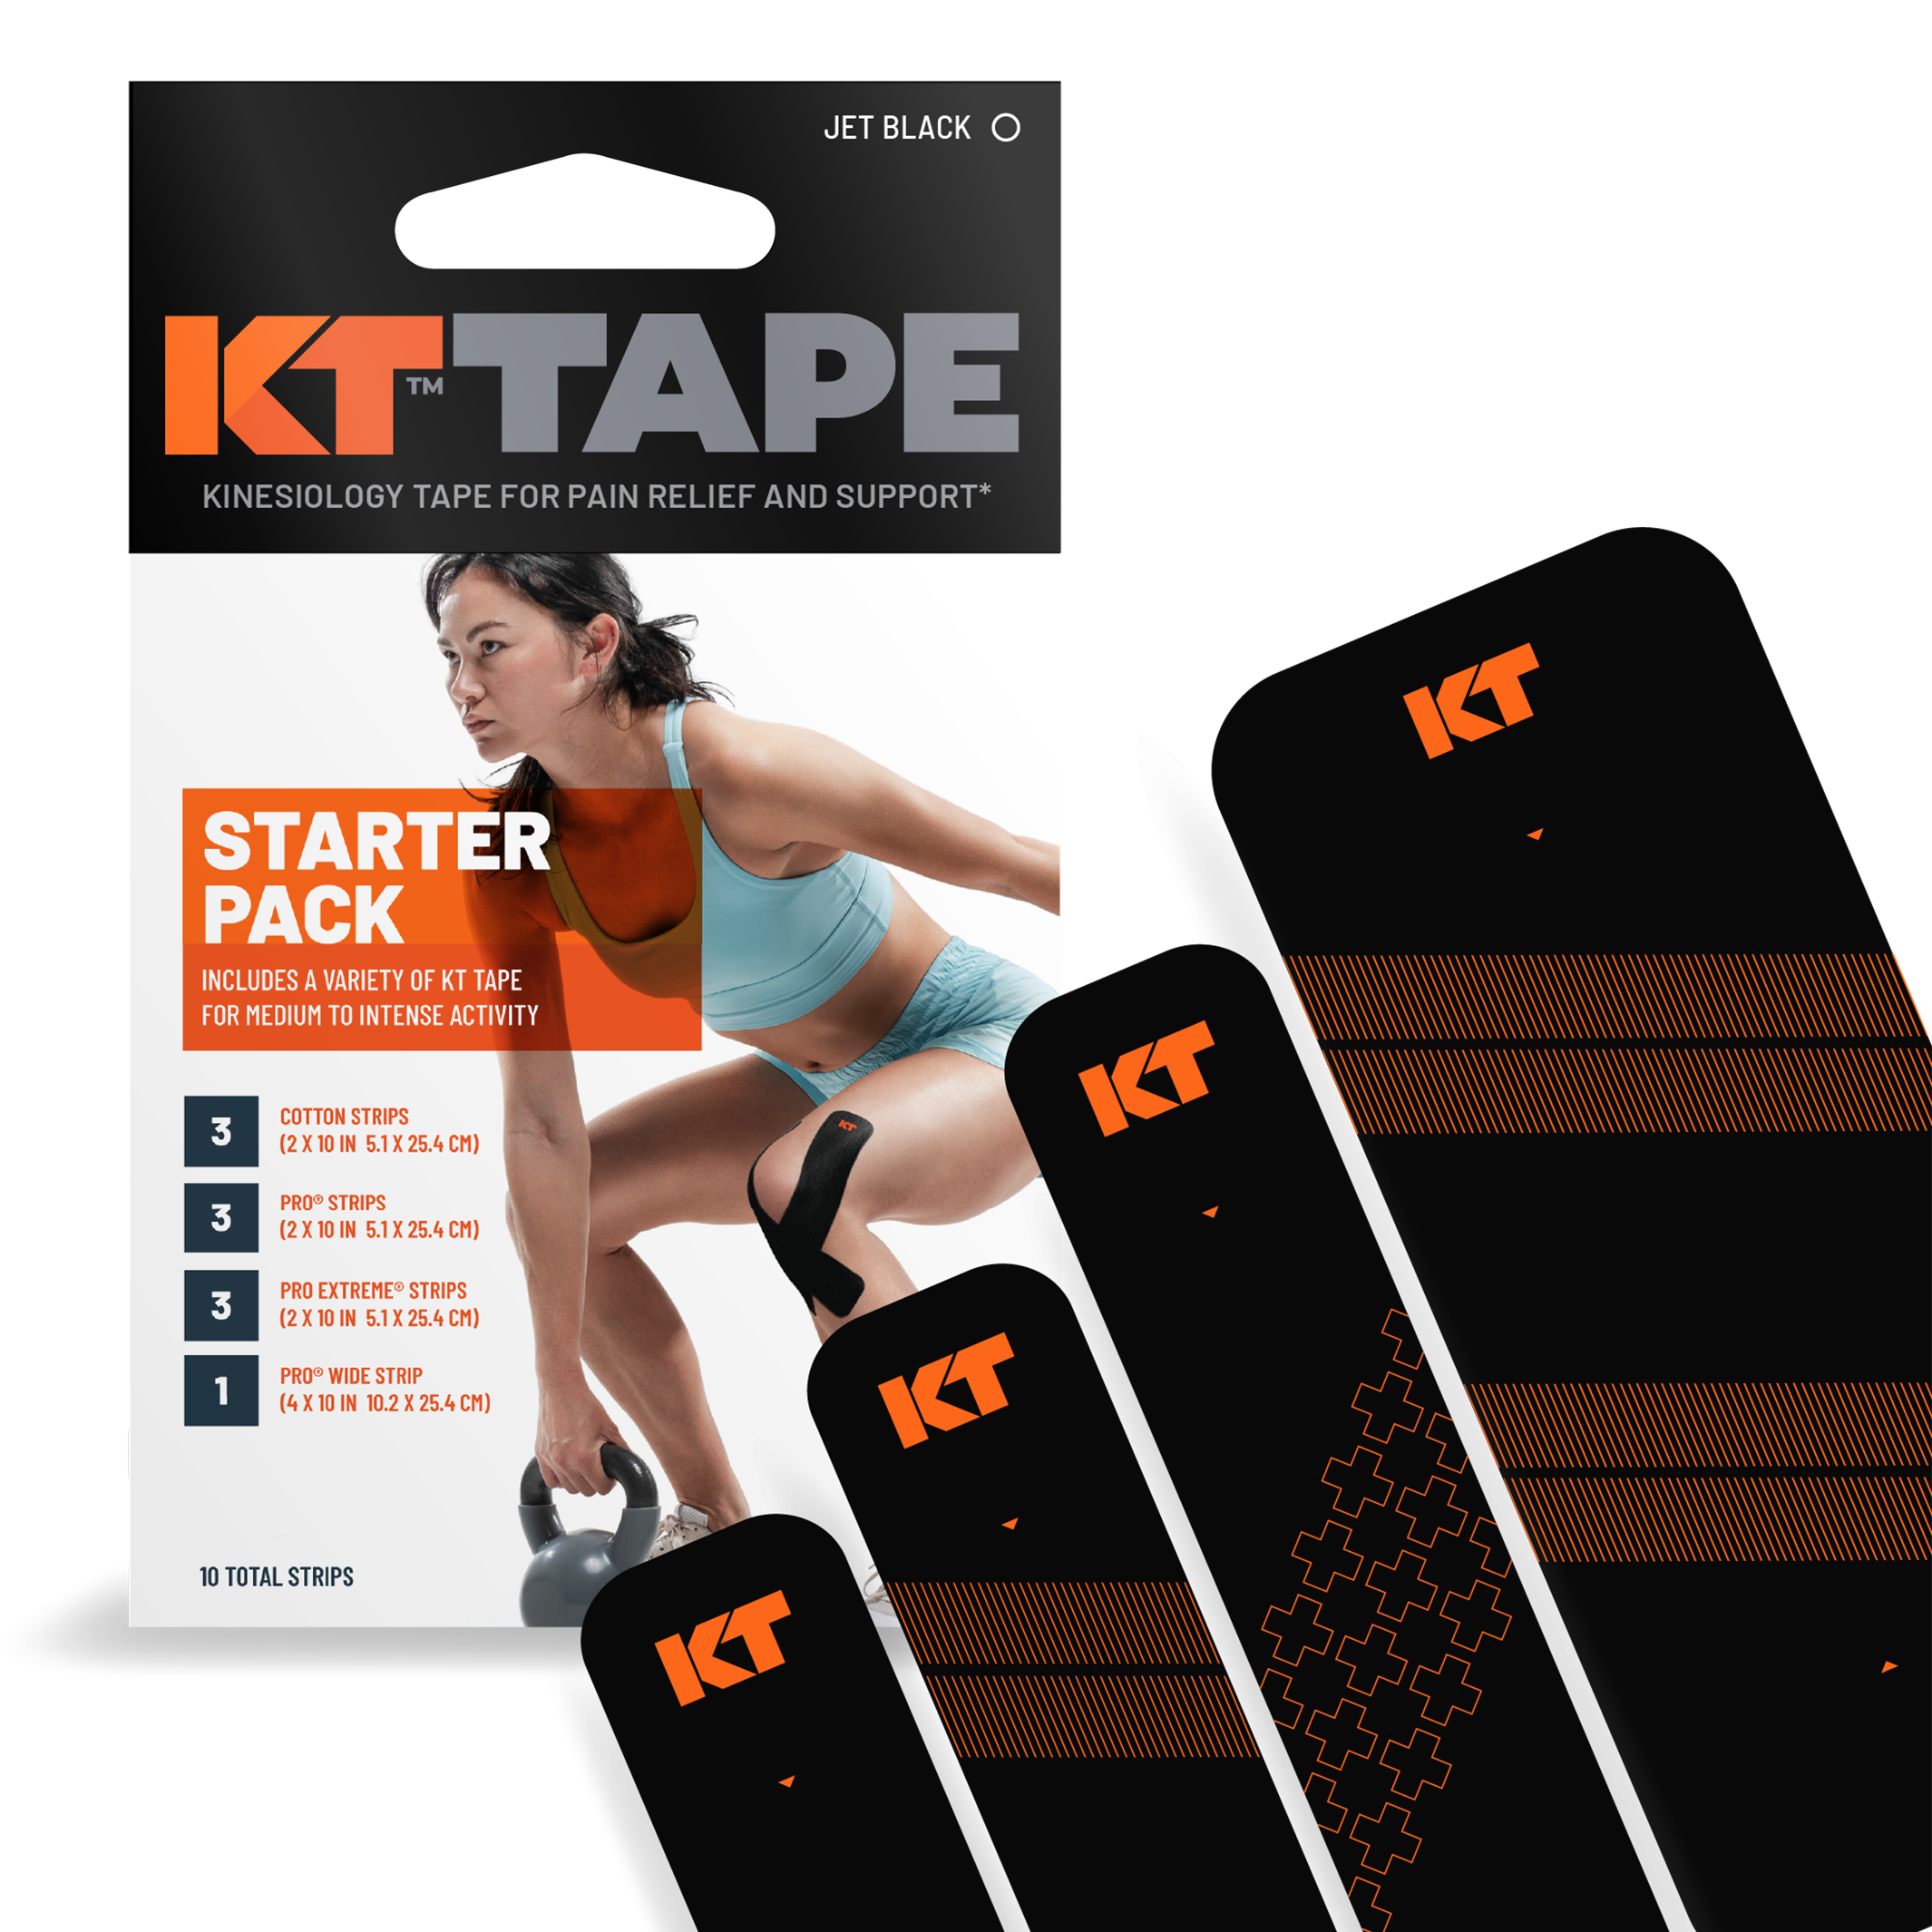 KT Tape Pro Jet Black Kinesiology Therapeutic Tape, 20 count